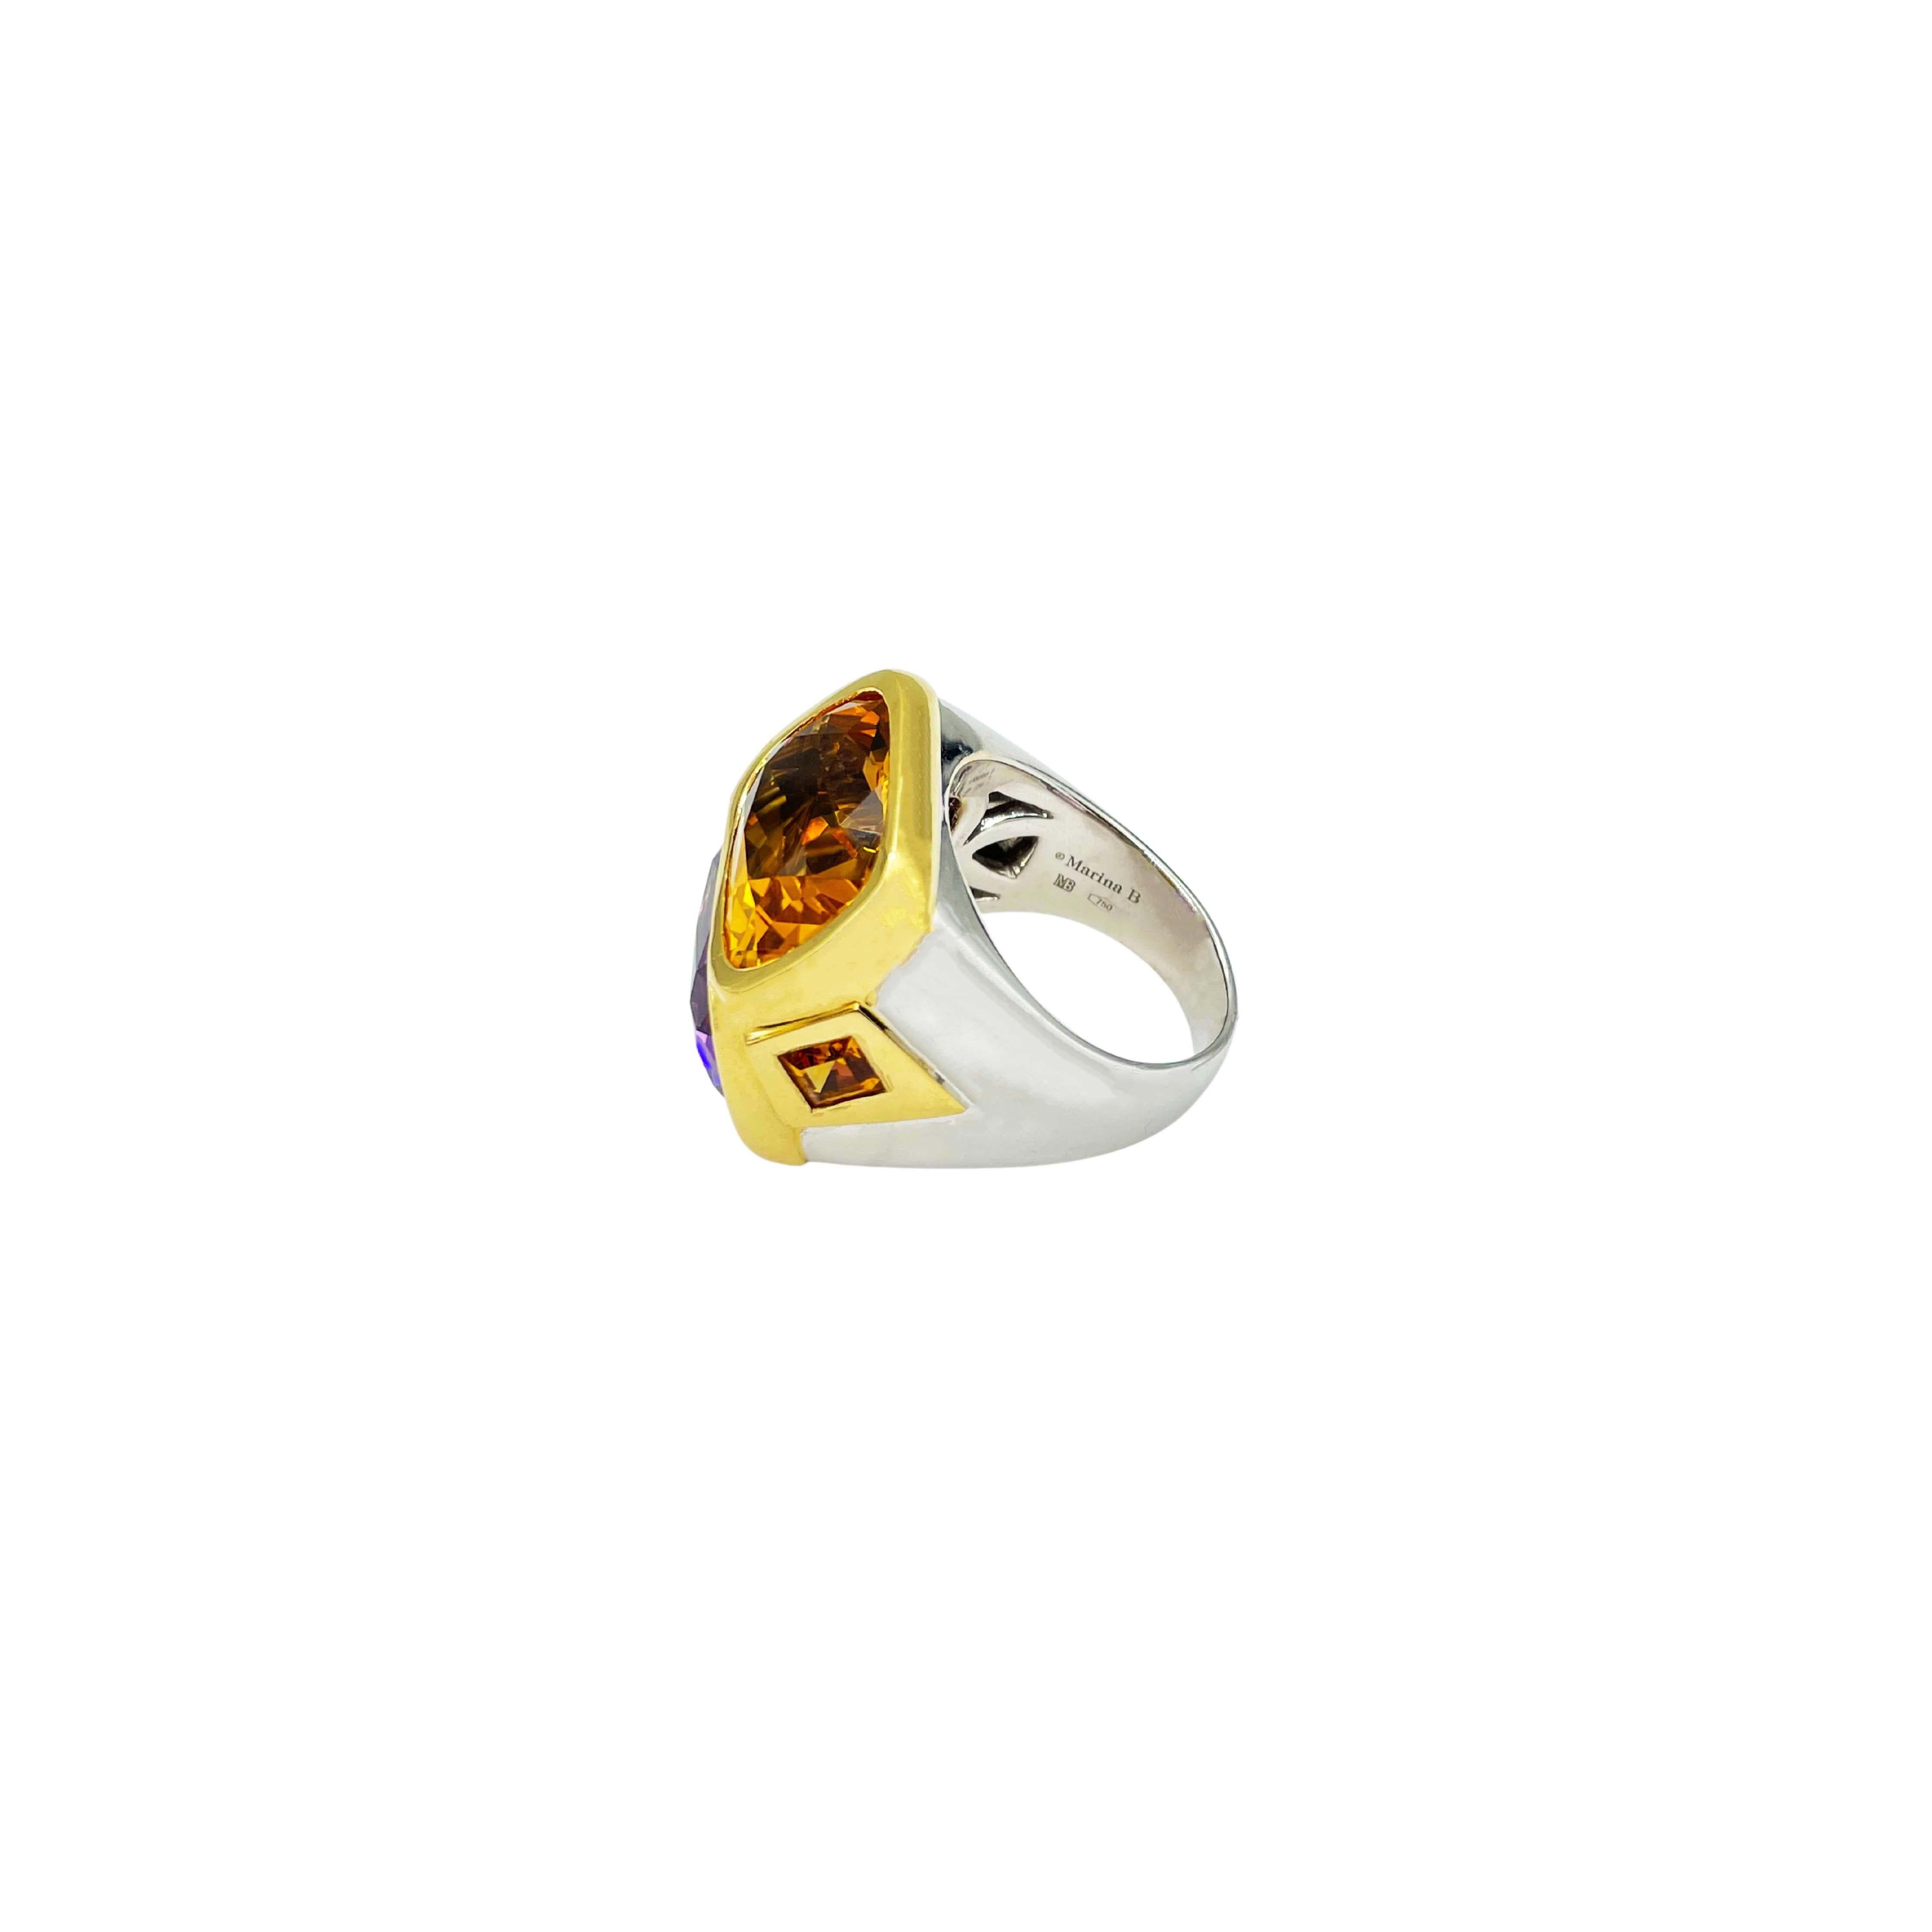 A Marina B 18k White and Yellow Gold Citrine and Amethyst Ring. Made in Italy, circa 2010 

